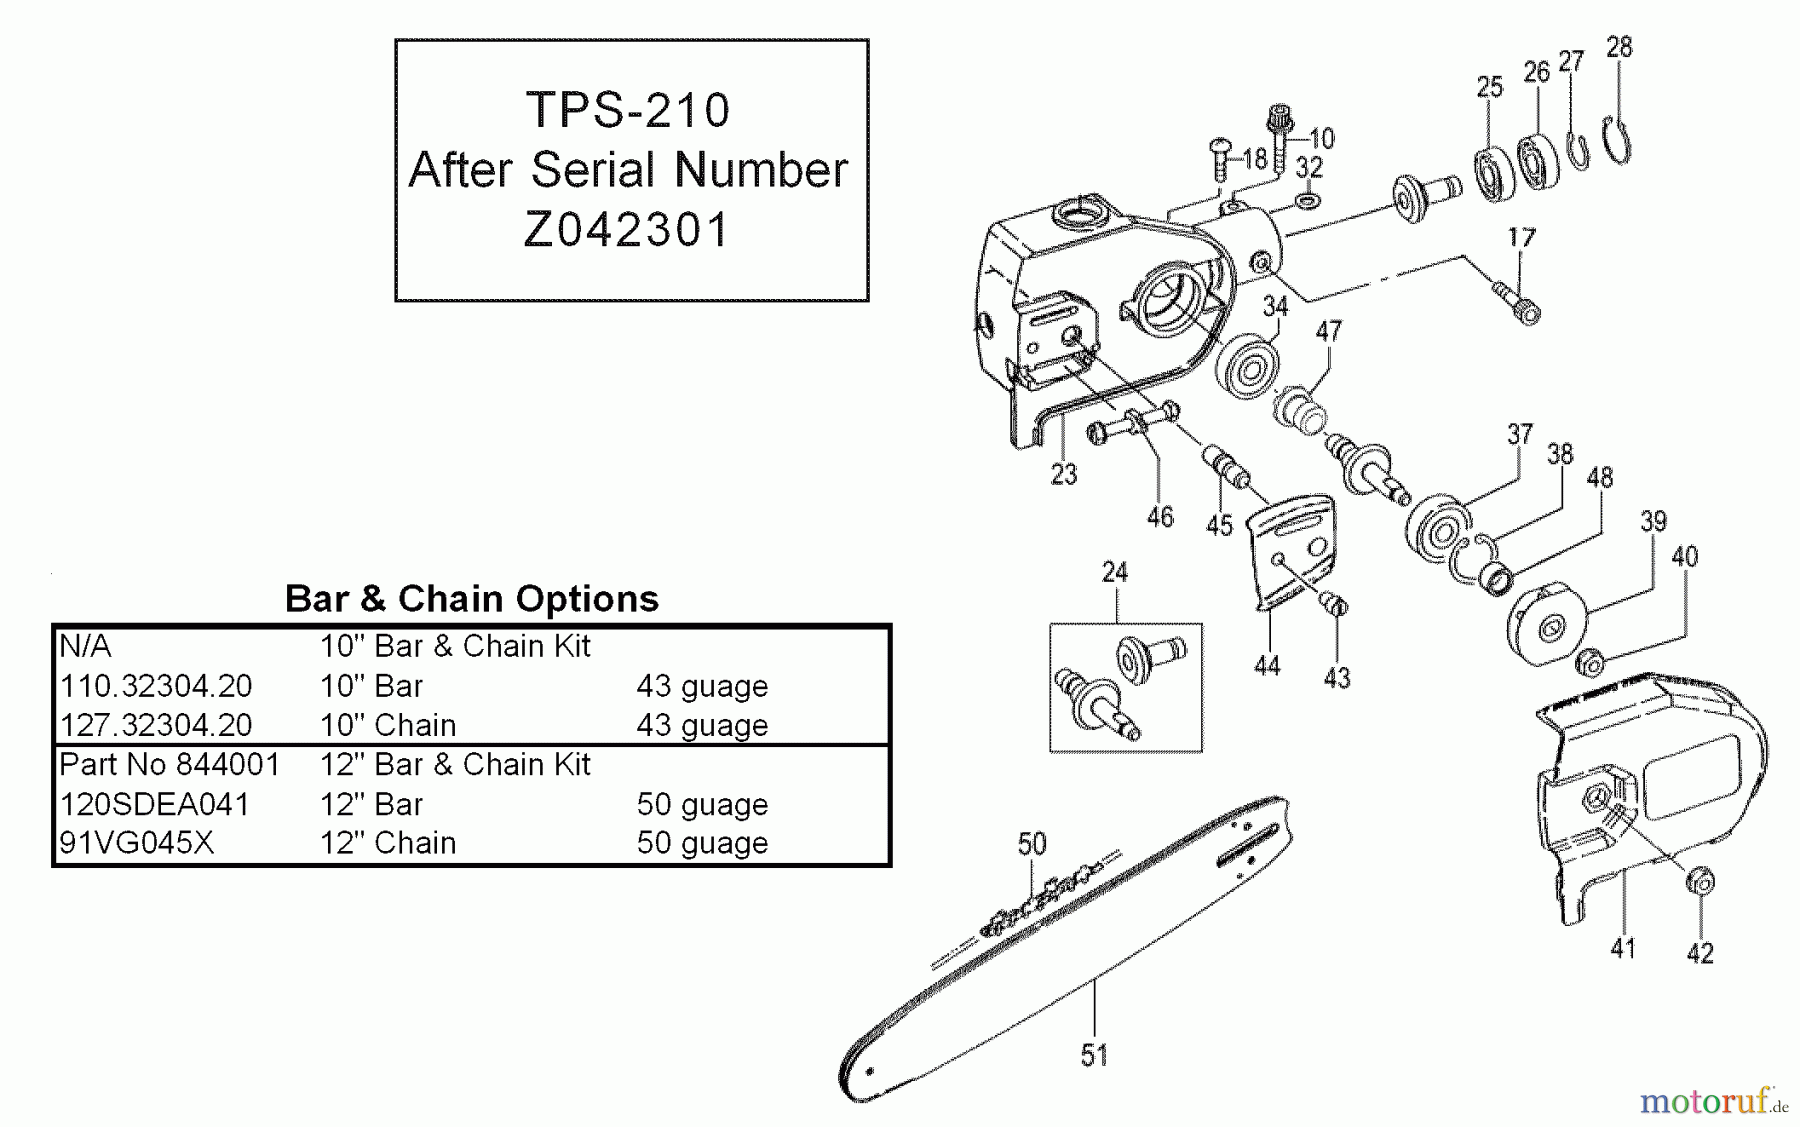  Tanaka Zubehör TPS-210 - Tanaka Pole Saw Attachment Side Cover, Sprocket, Bar & Chain TPS-210 (After Serial Number Z042301)